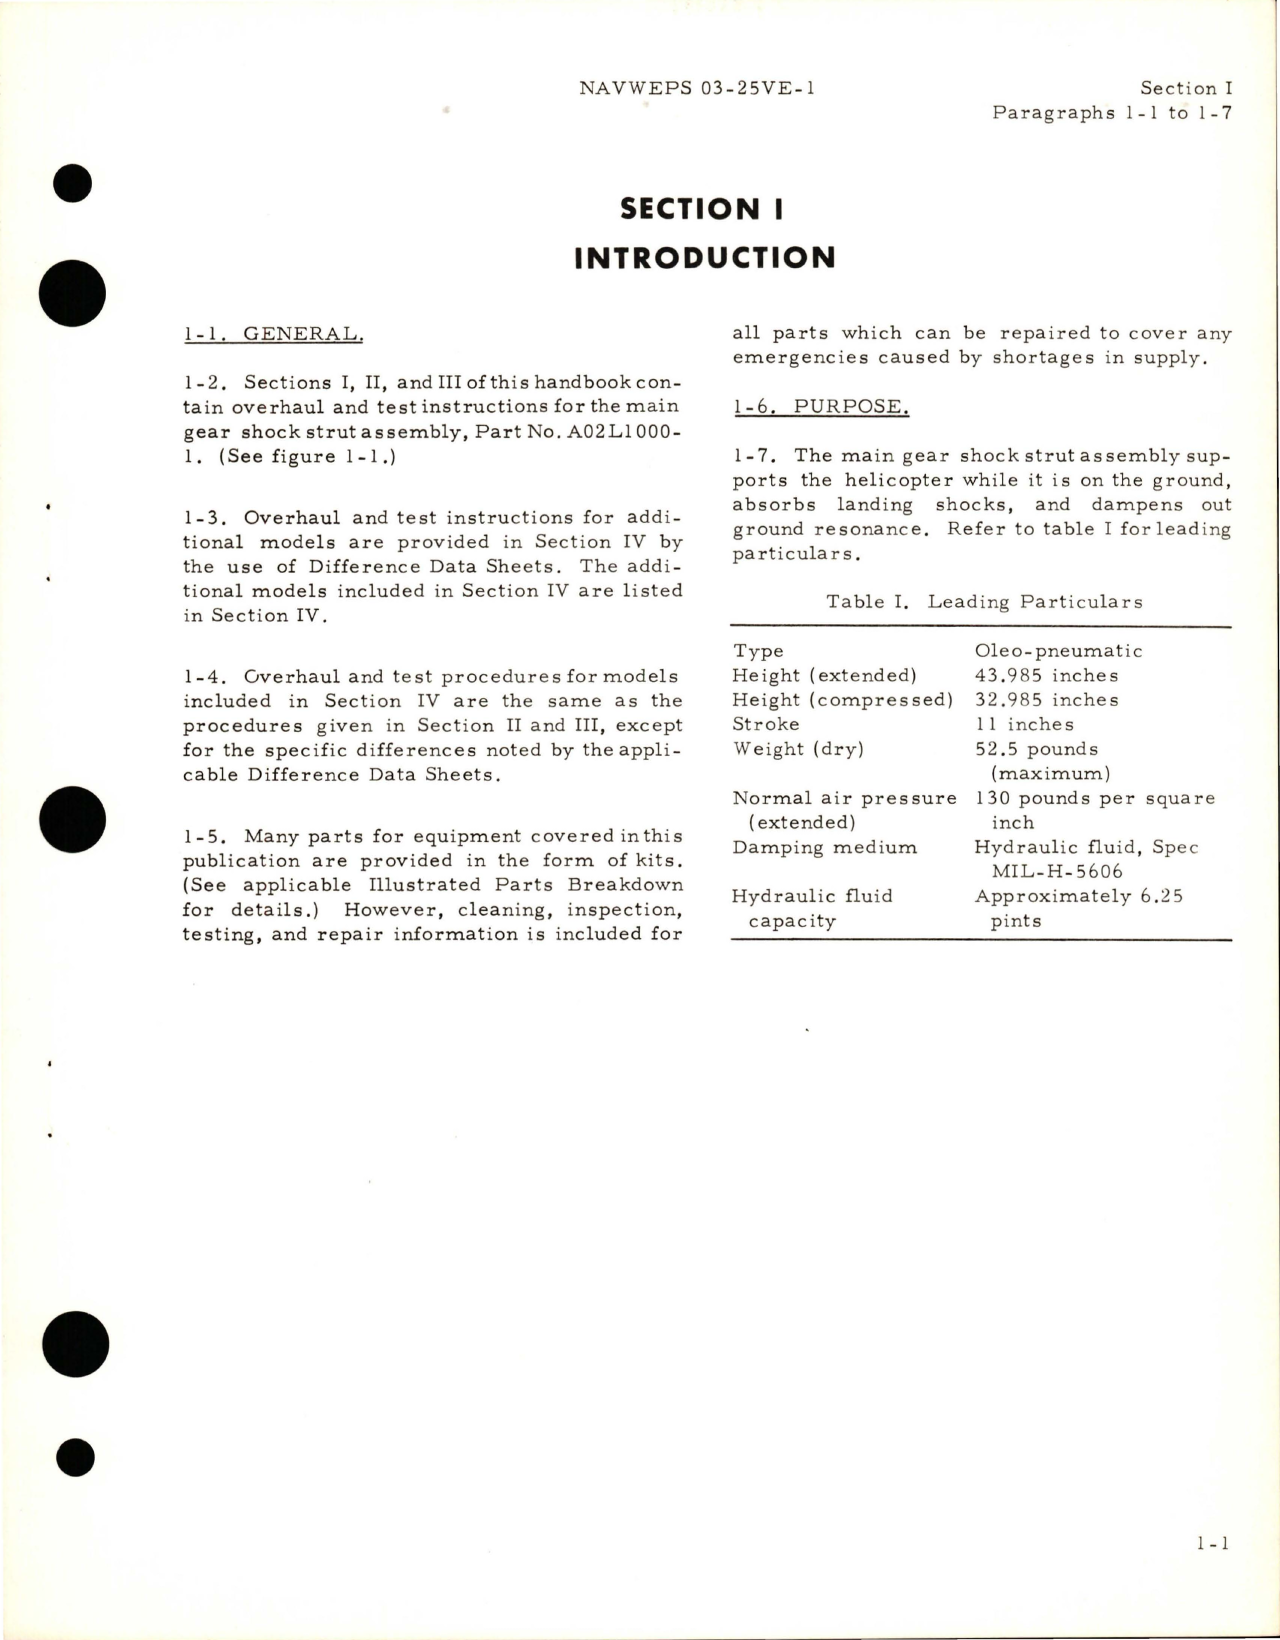 Sample page 5 from AirCorps Library document: Overhaul Instructions for Main Gear Shock Strut Assembly - Part A02L1000-1, A02L1000-3, A02L1000-5, and A02L1000-7 